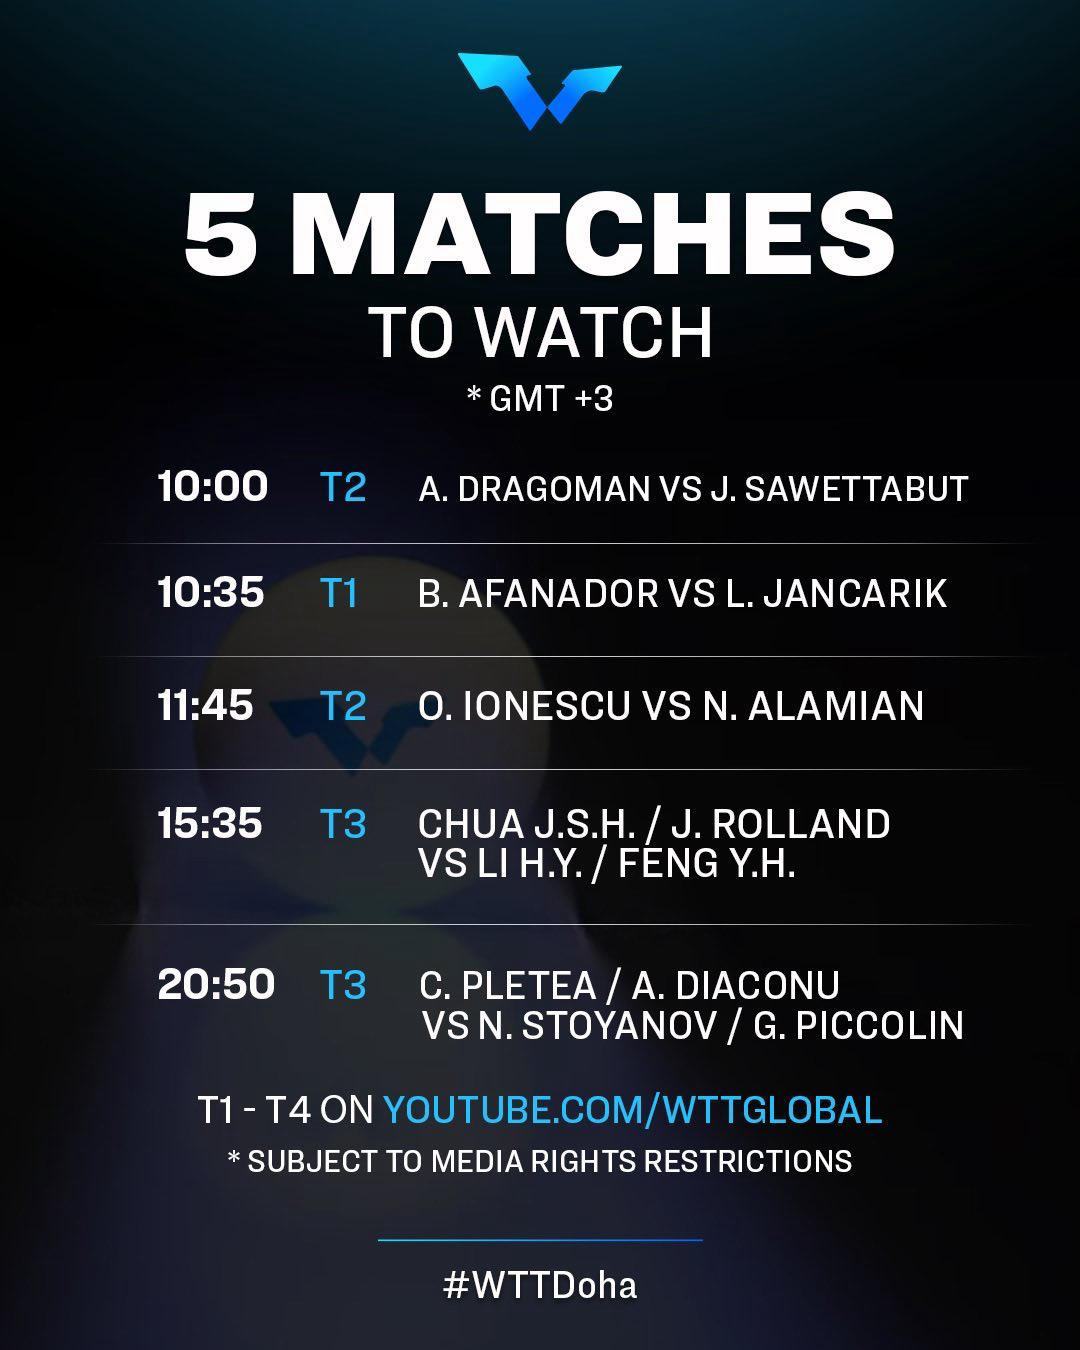 Day 2 of Qualifying at #WTTDoha is set to kick off at 10am (GMT +3), which match are you most excite